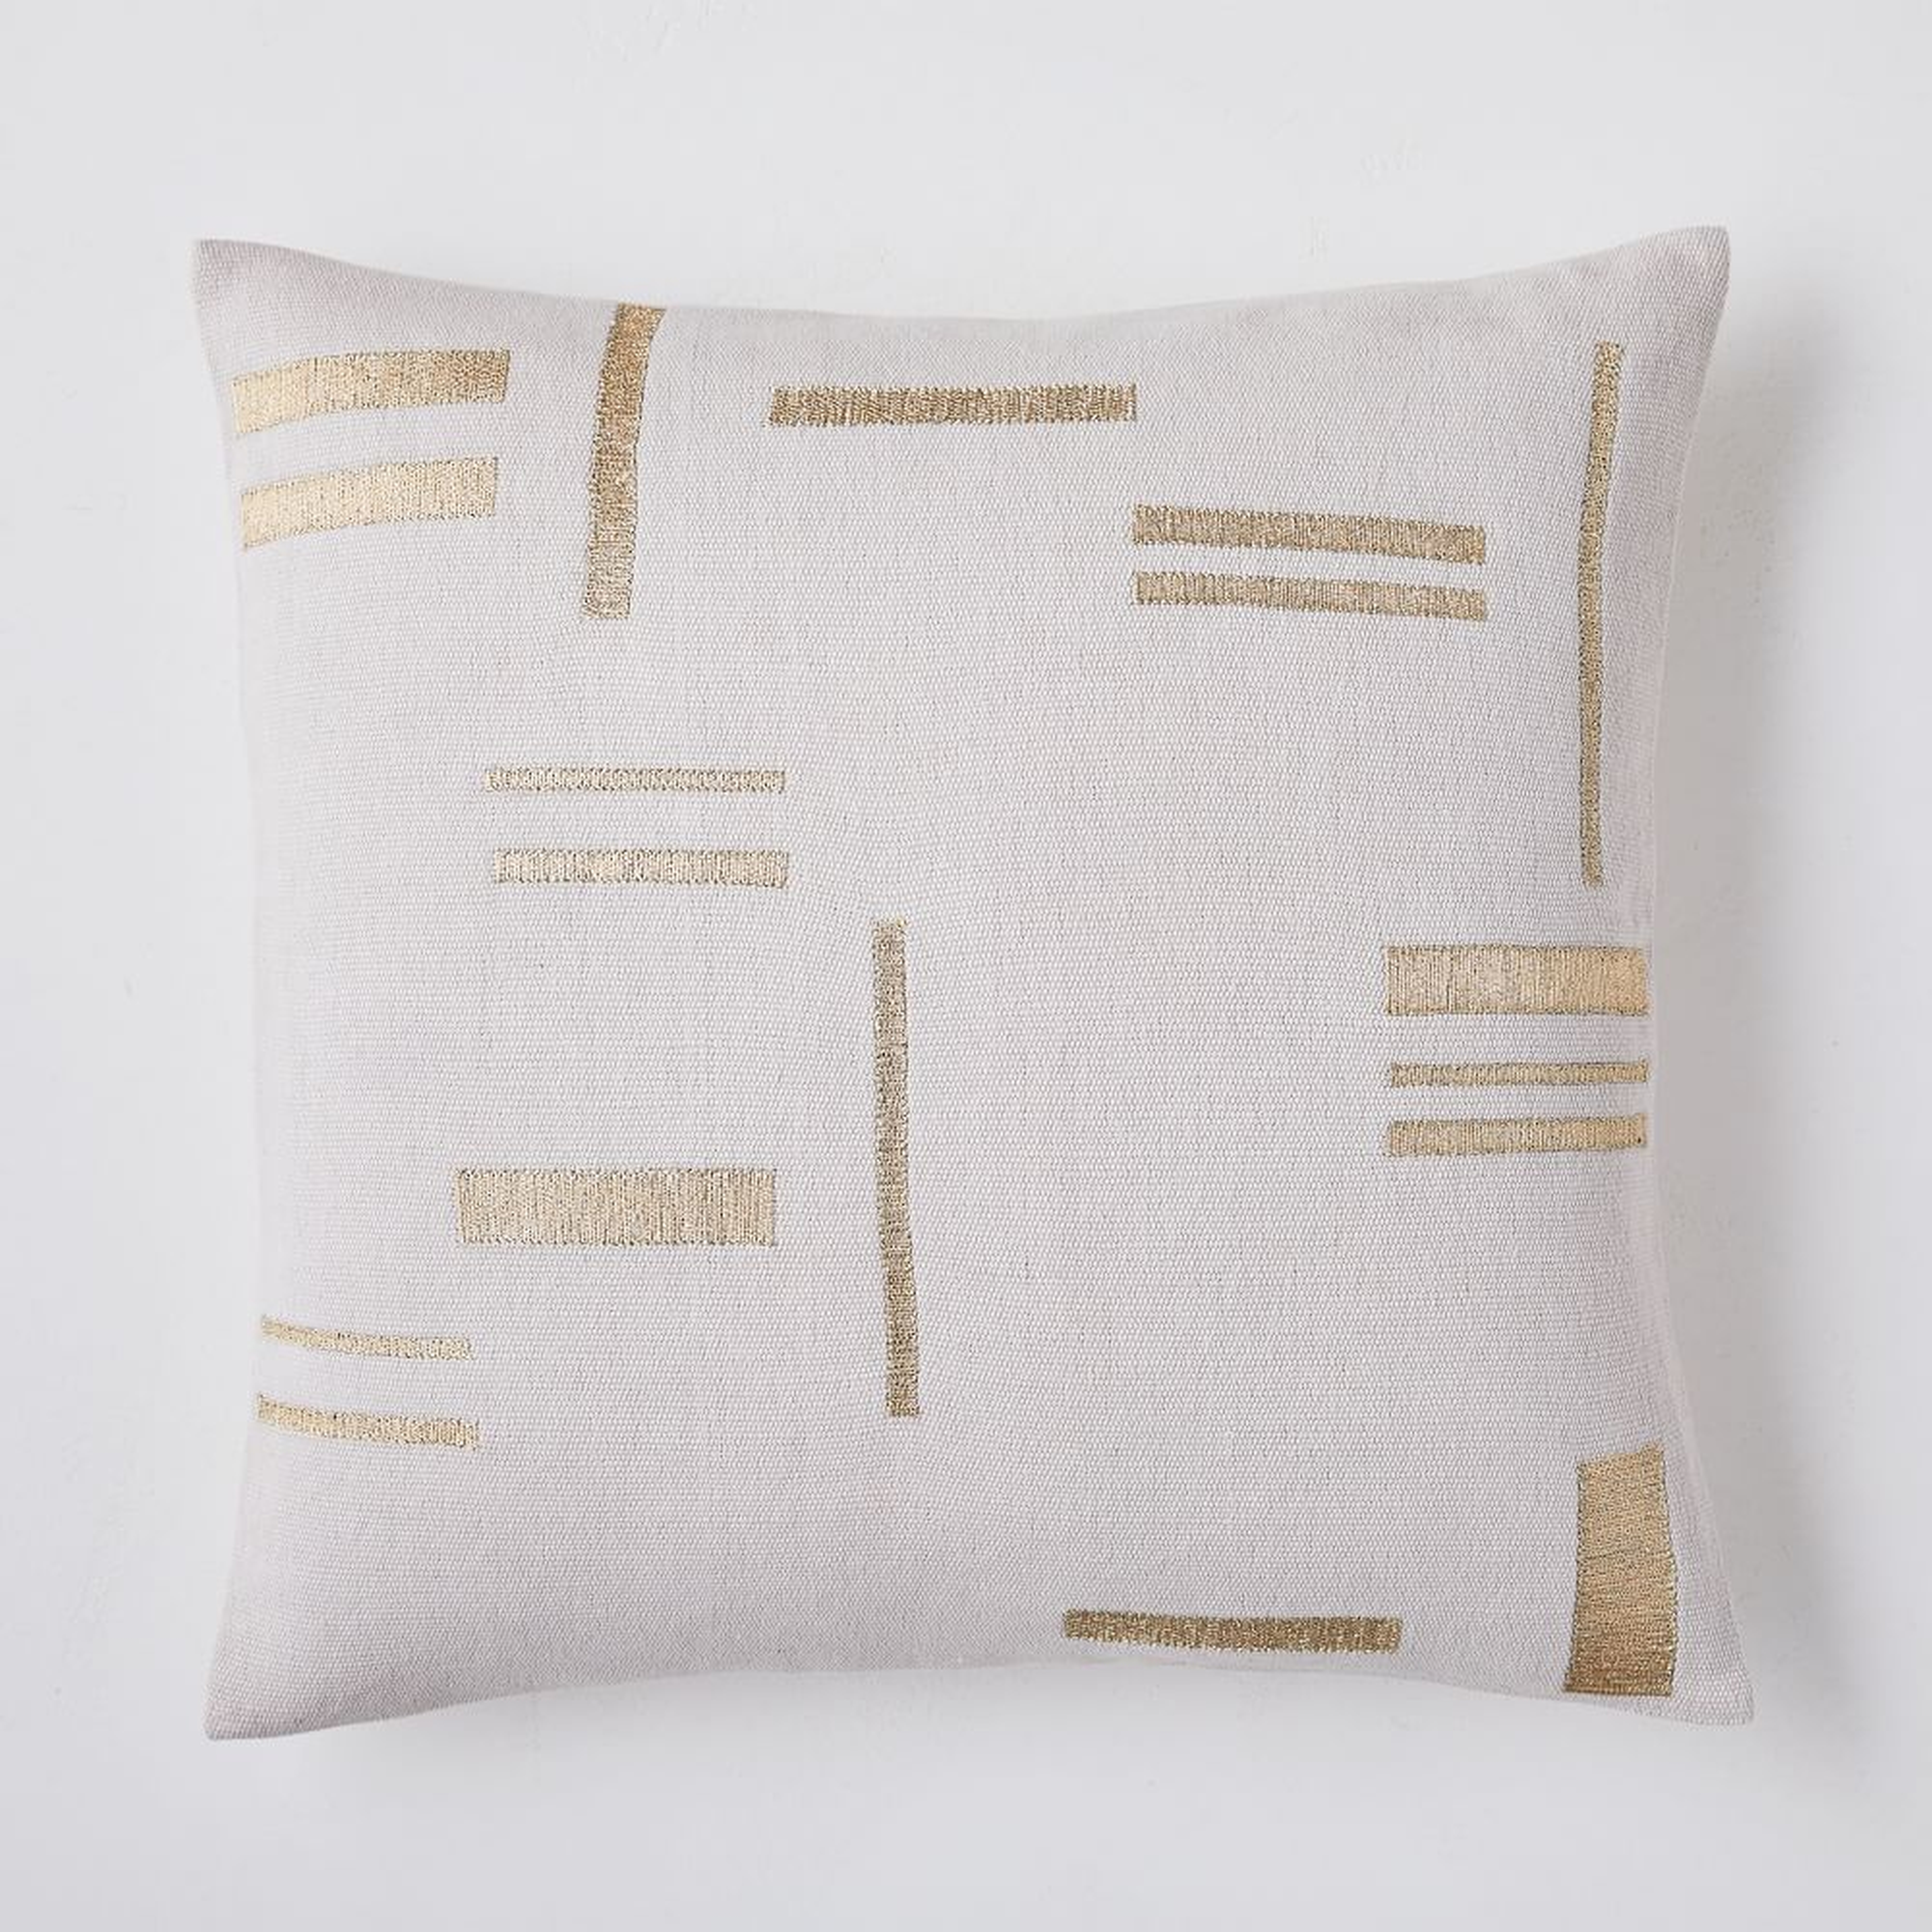 Embroidered Metallic Blocks Pillow Cover, 24"x24", Natural - West Elm